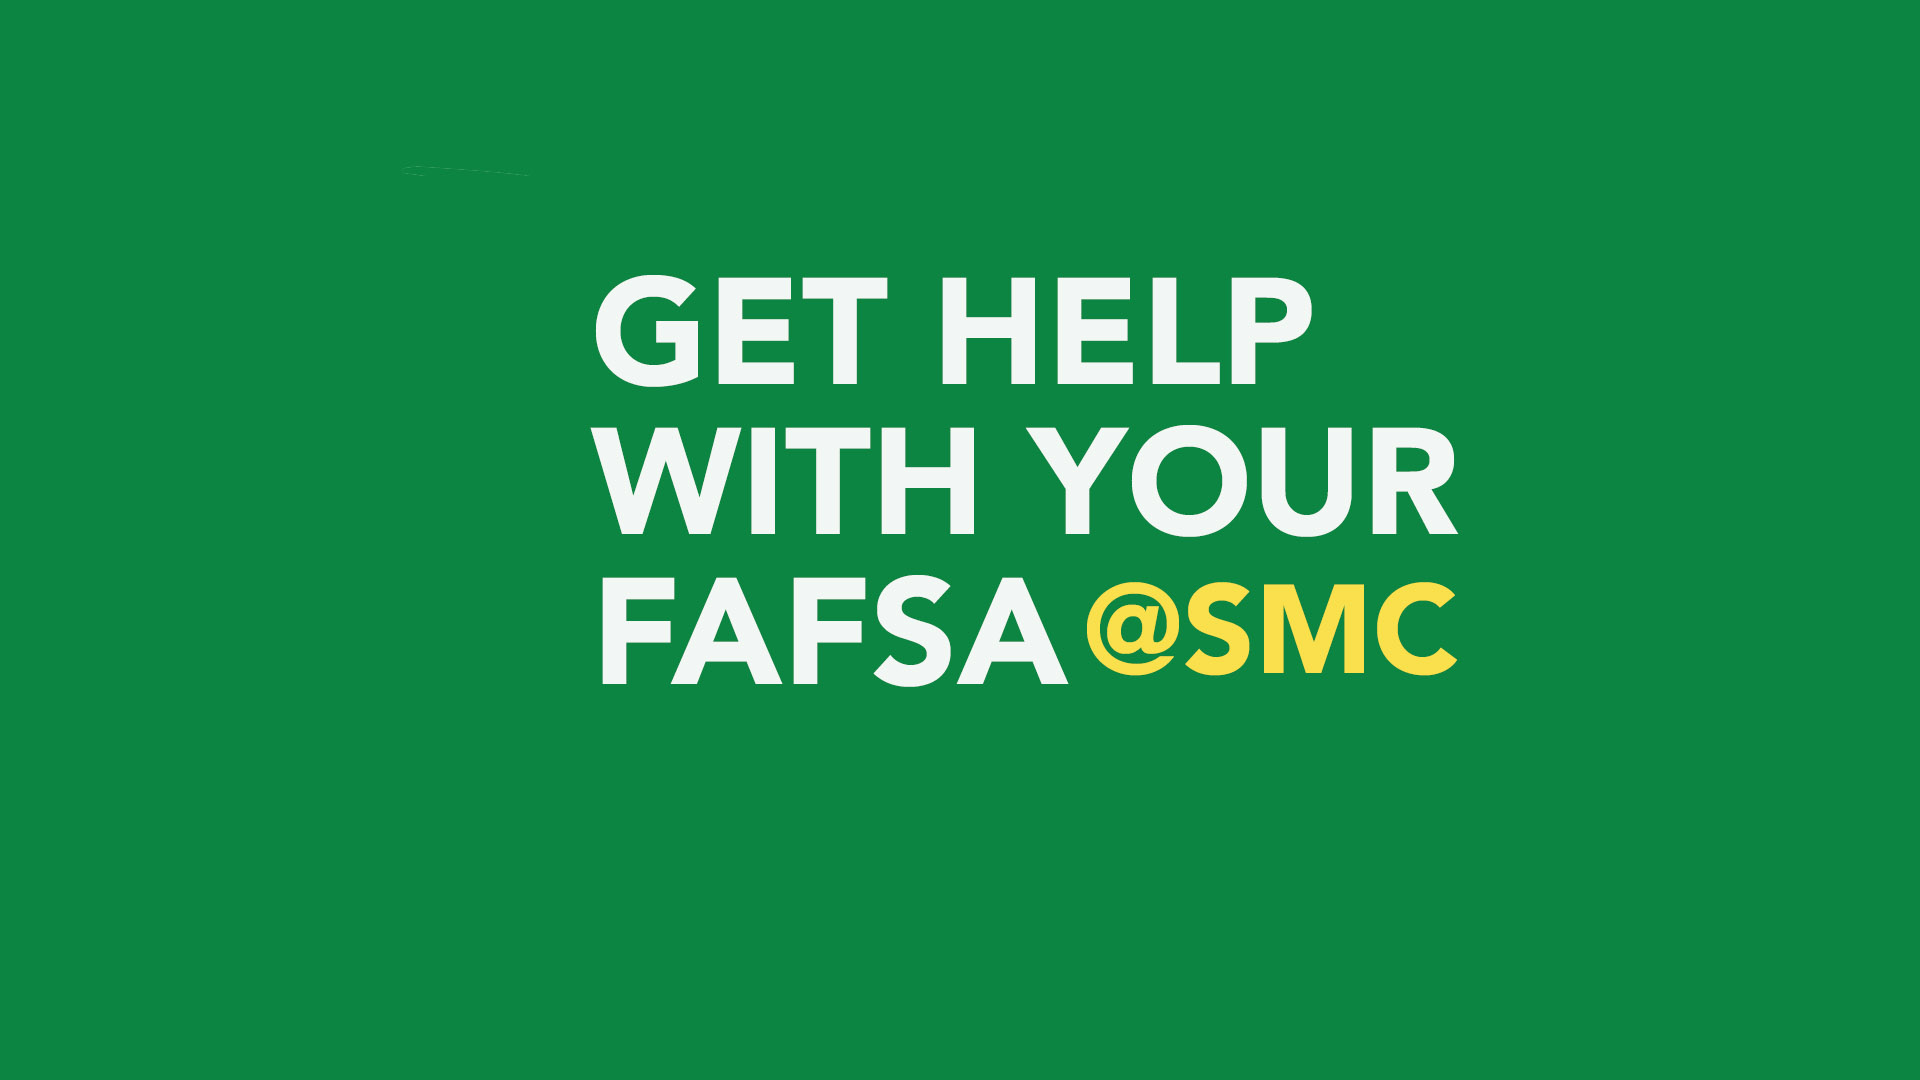 Get help with your FAFSA. Attend SMC FAFSA Night workshop.